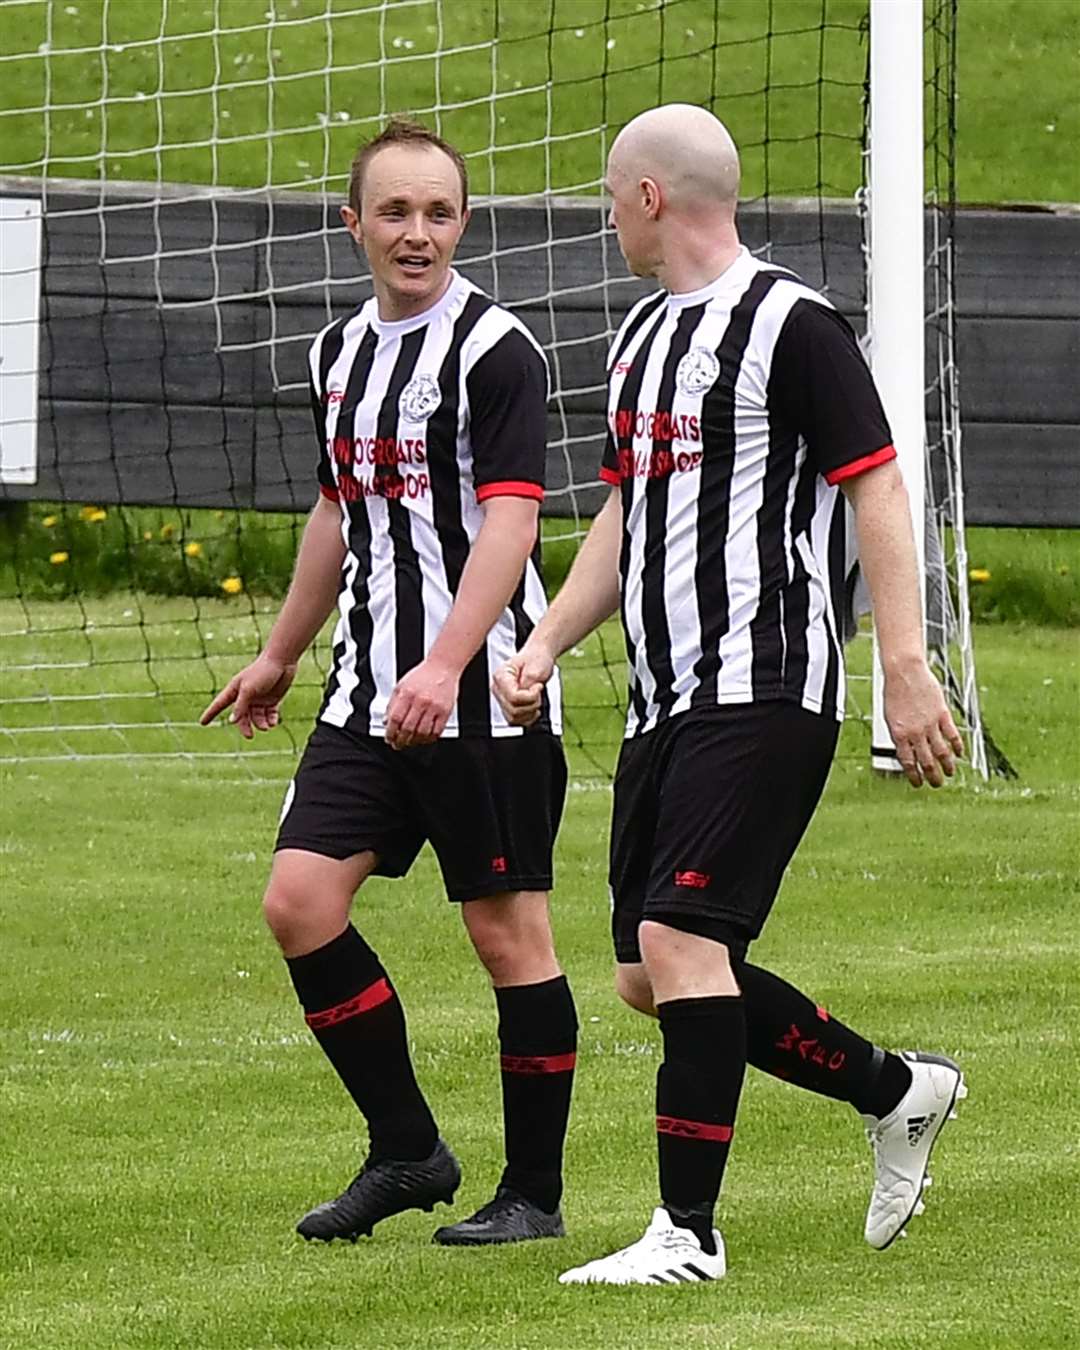 Still going strong: Richard Macadie and Gary Weir were both on the scoresheet. Picture: Mel Roger